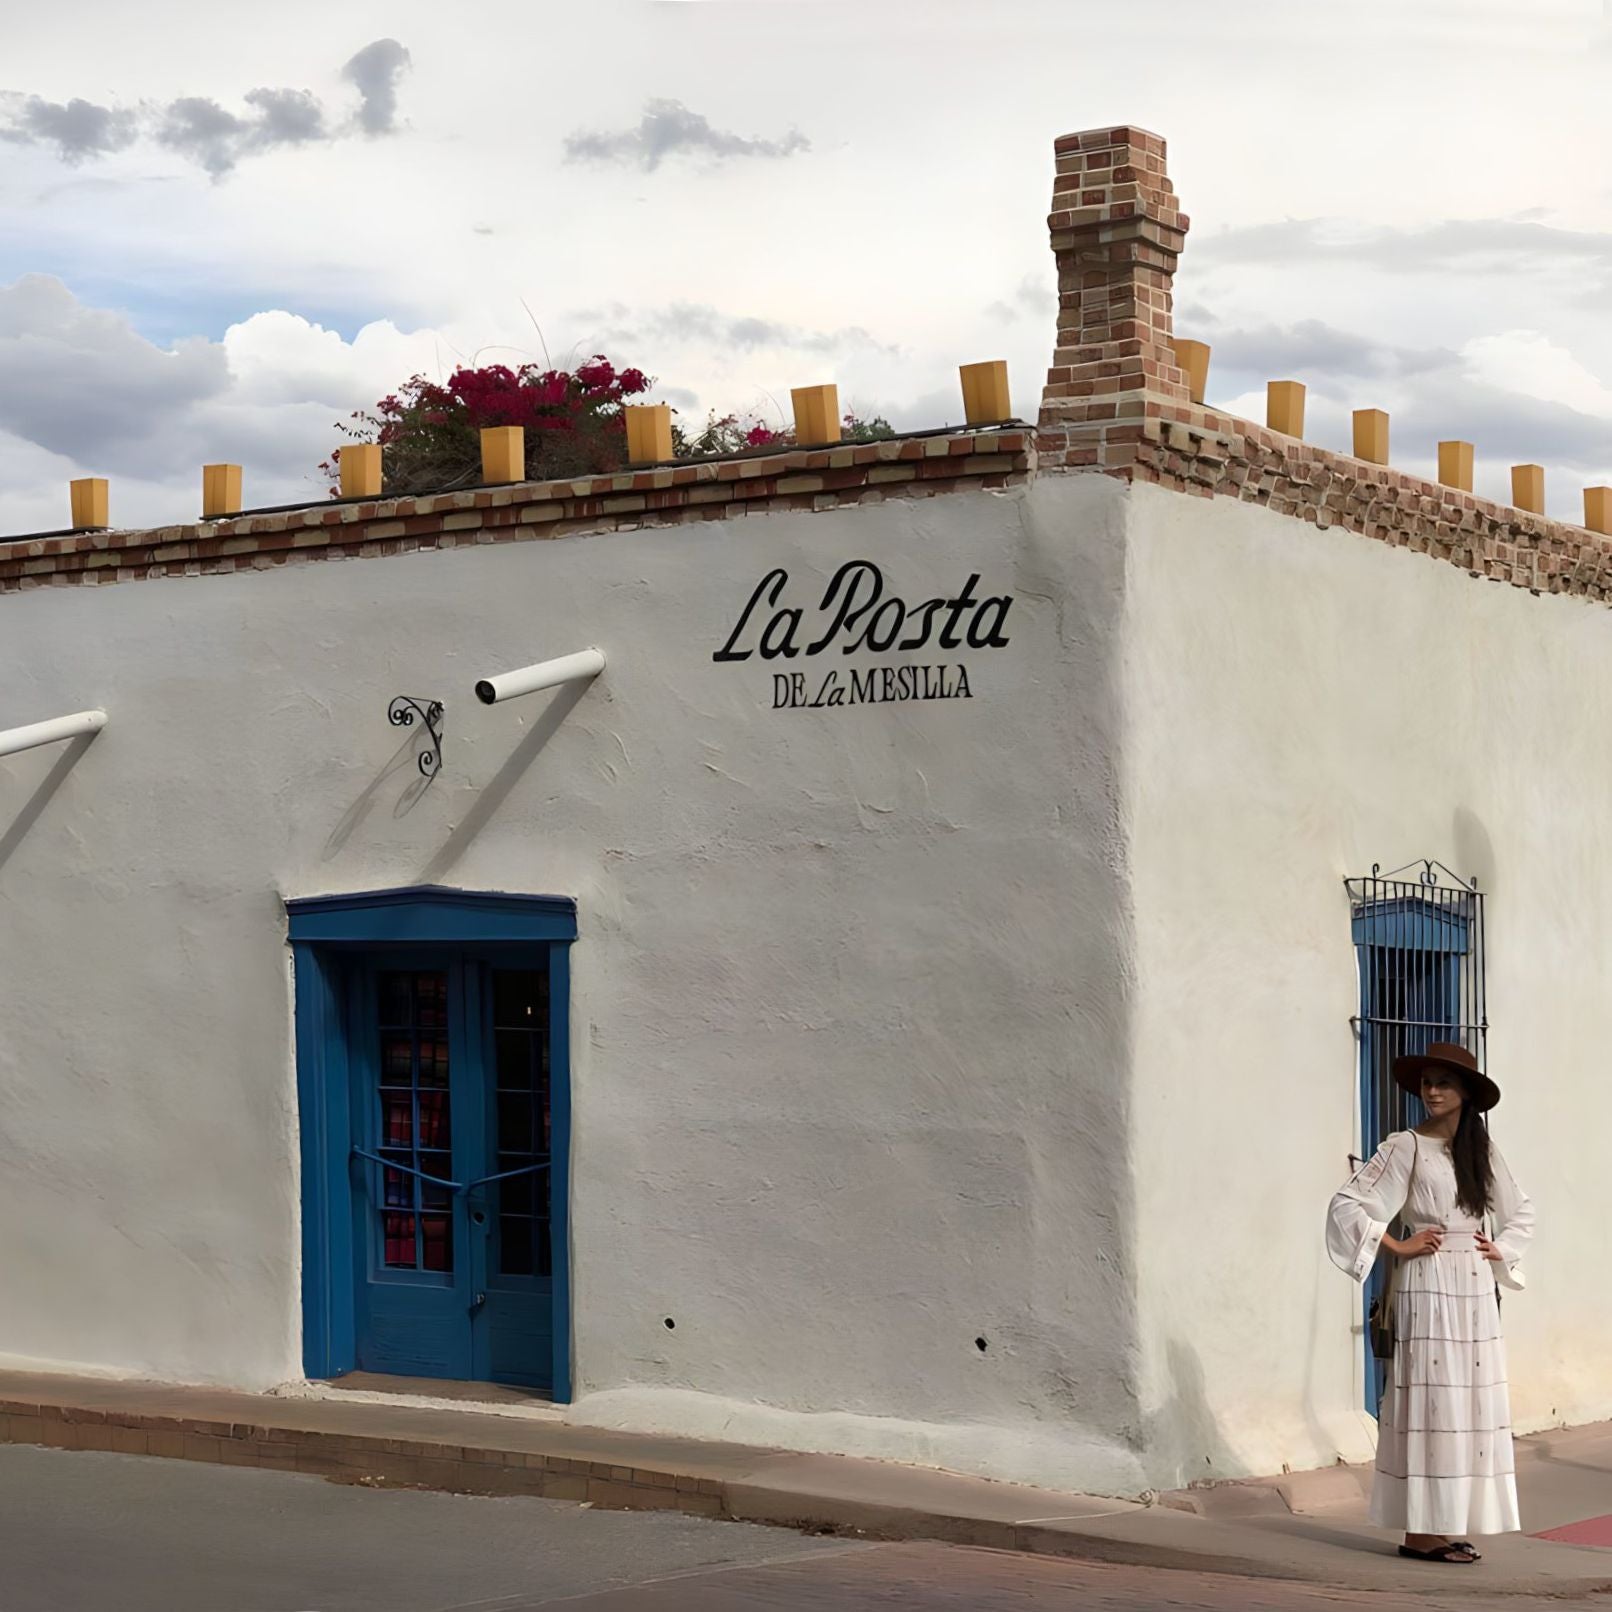 A woman in a stylish women's western hat stands in front of La Posta de La Mesilla, her elegance accentuating the rustic charm of the historic setting.